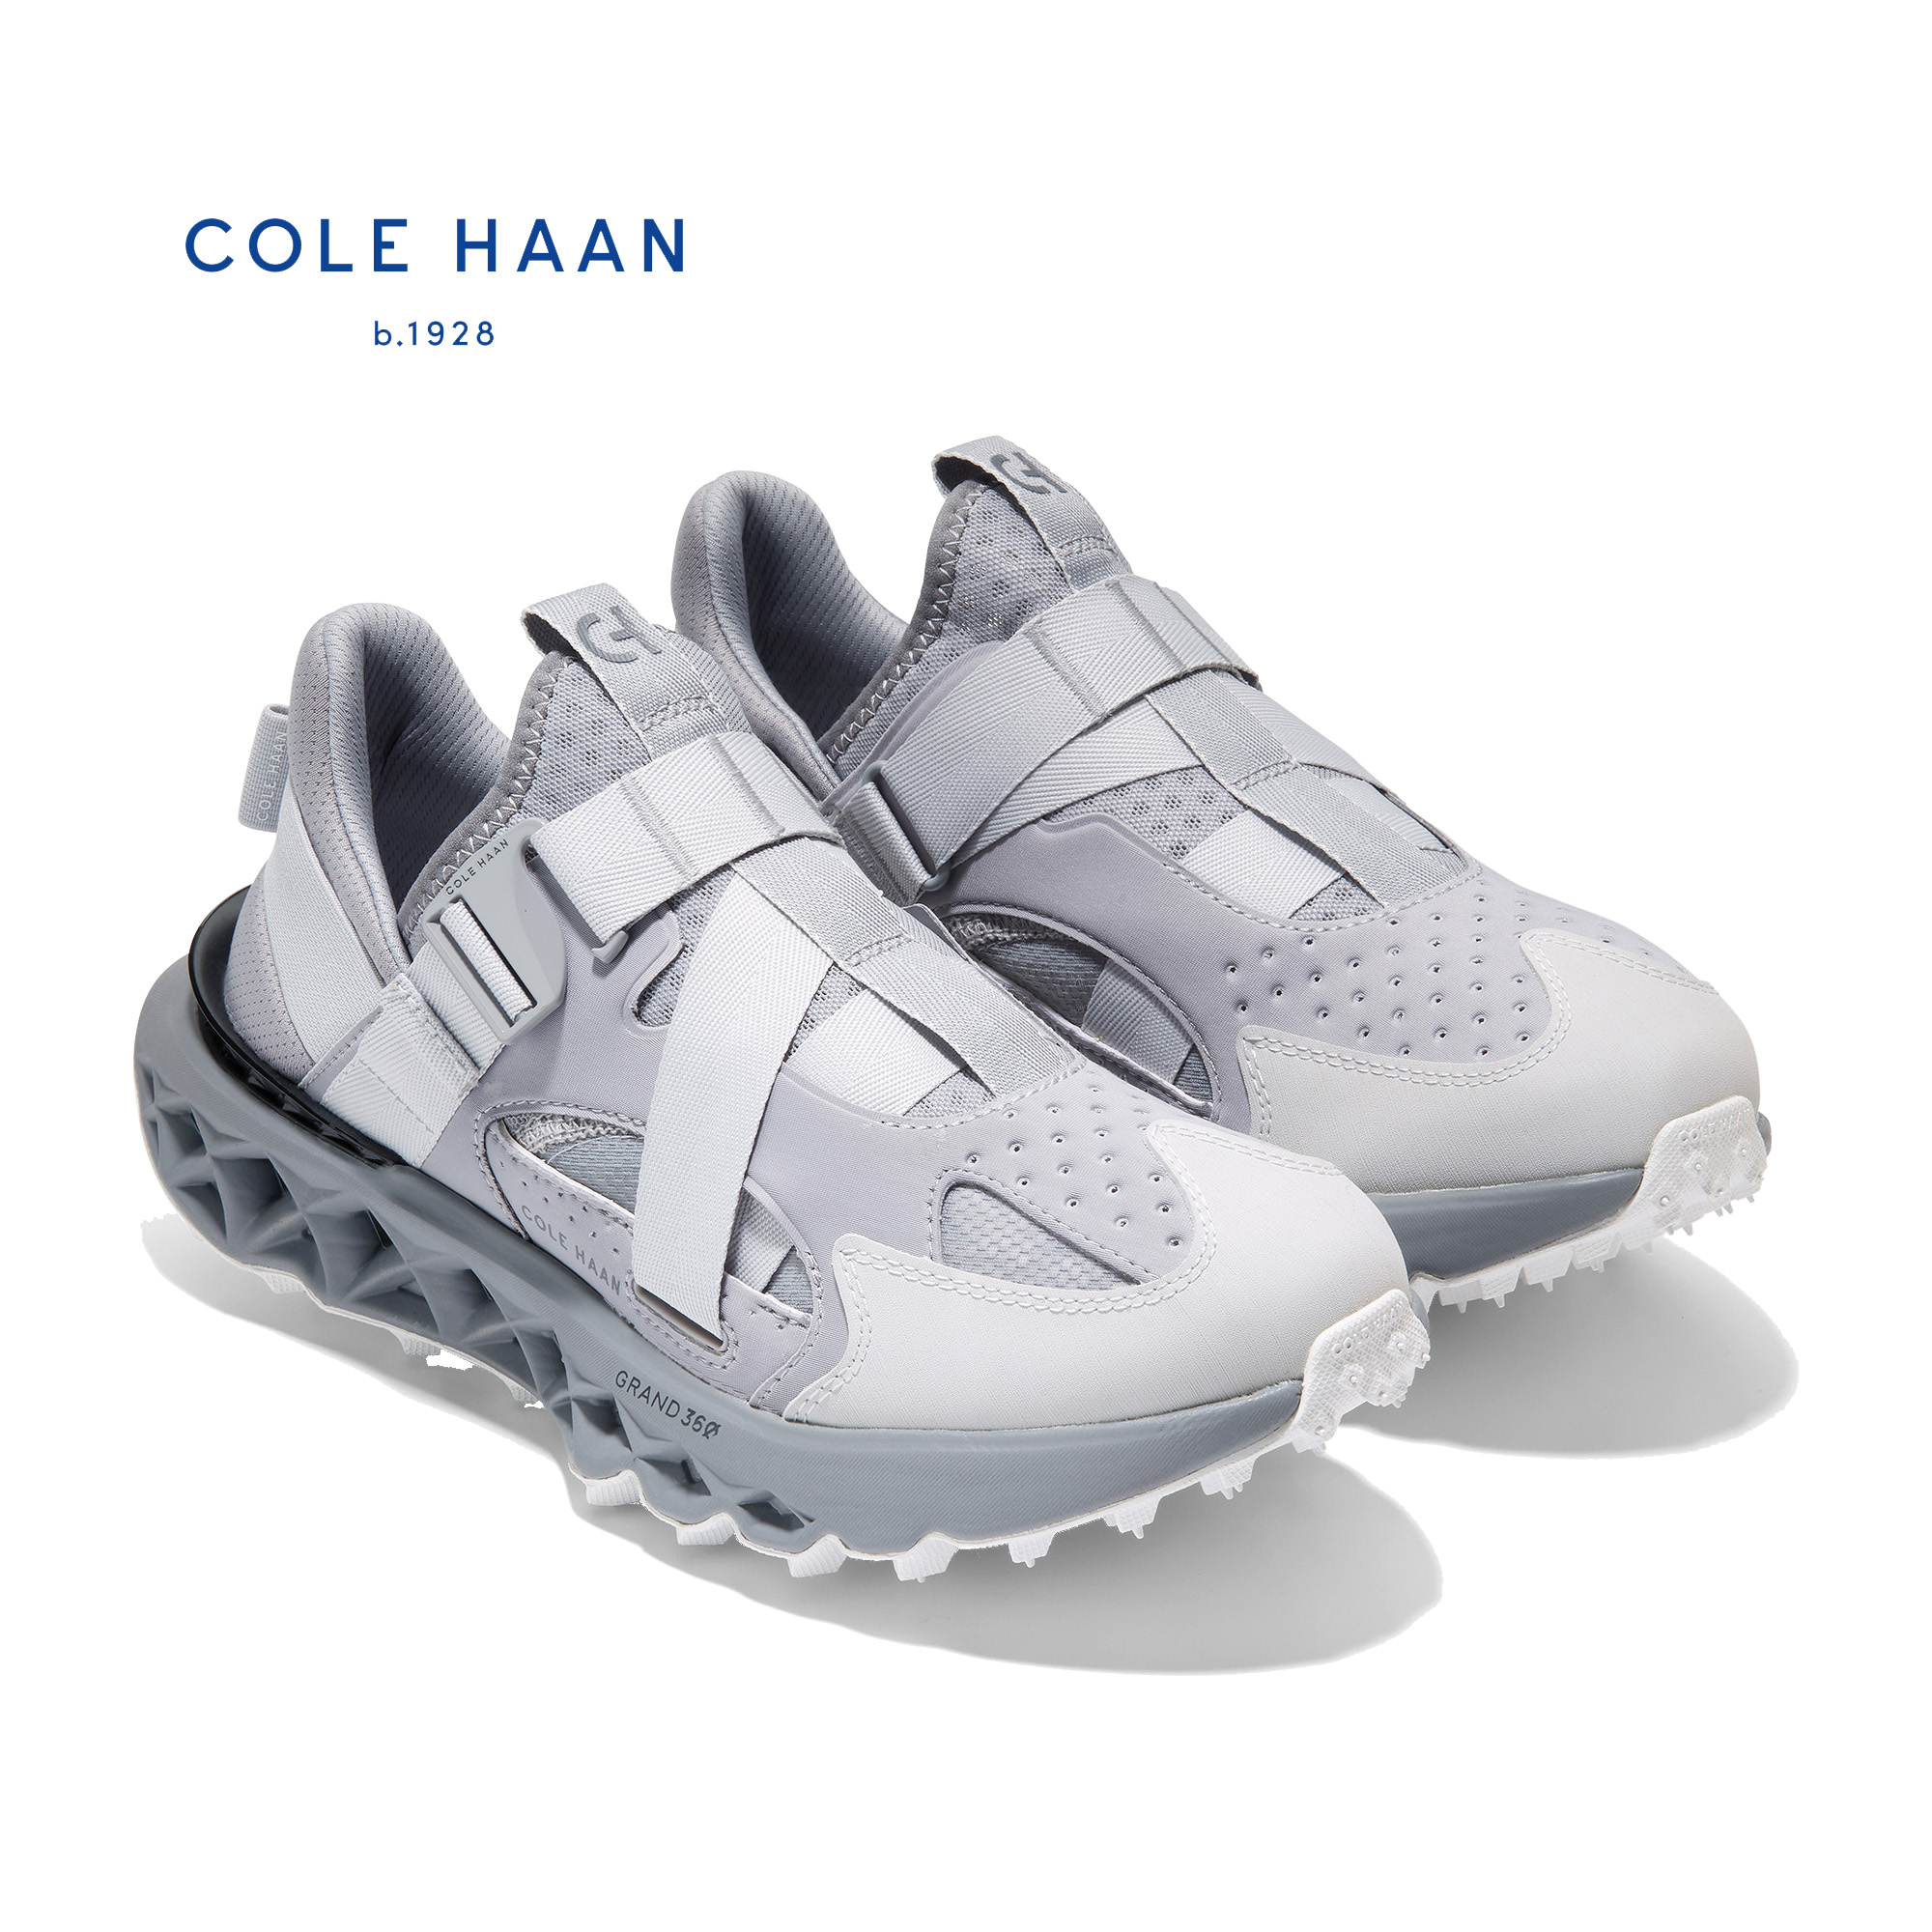 Cole Haan Sneakers & Sports Shoes outlet - Men - 1800 products on sale |  FASHIOLA.co.uk